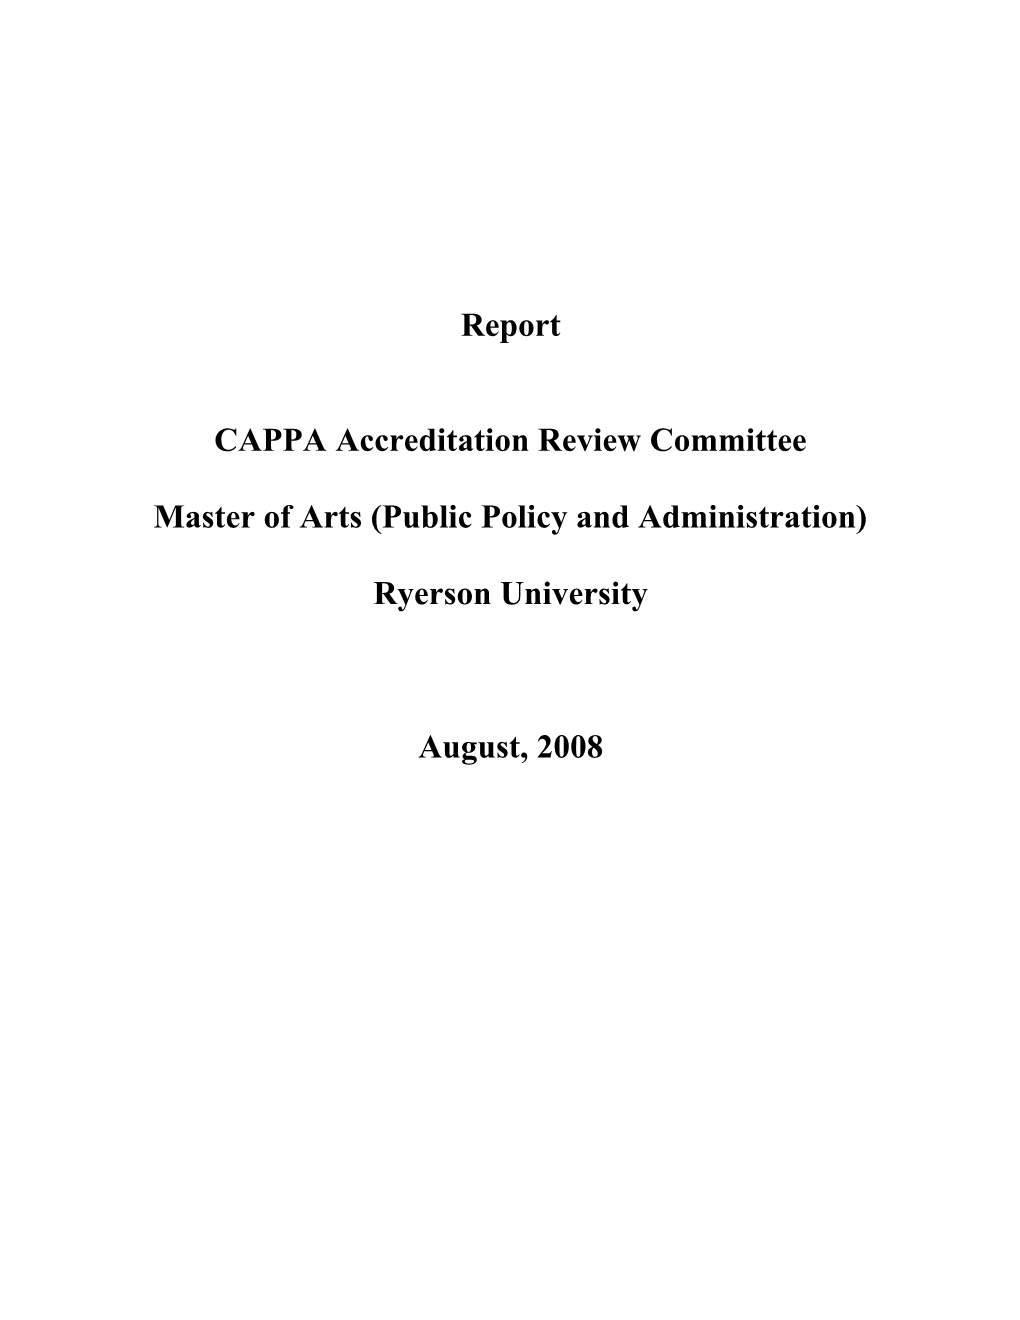 Review of the CAPPA Accreditation Review Panel